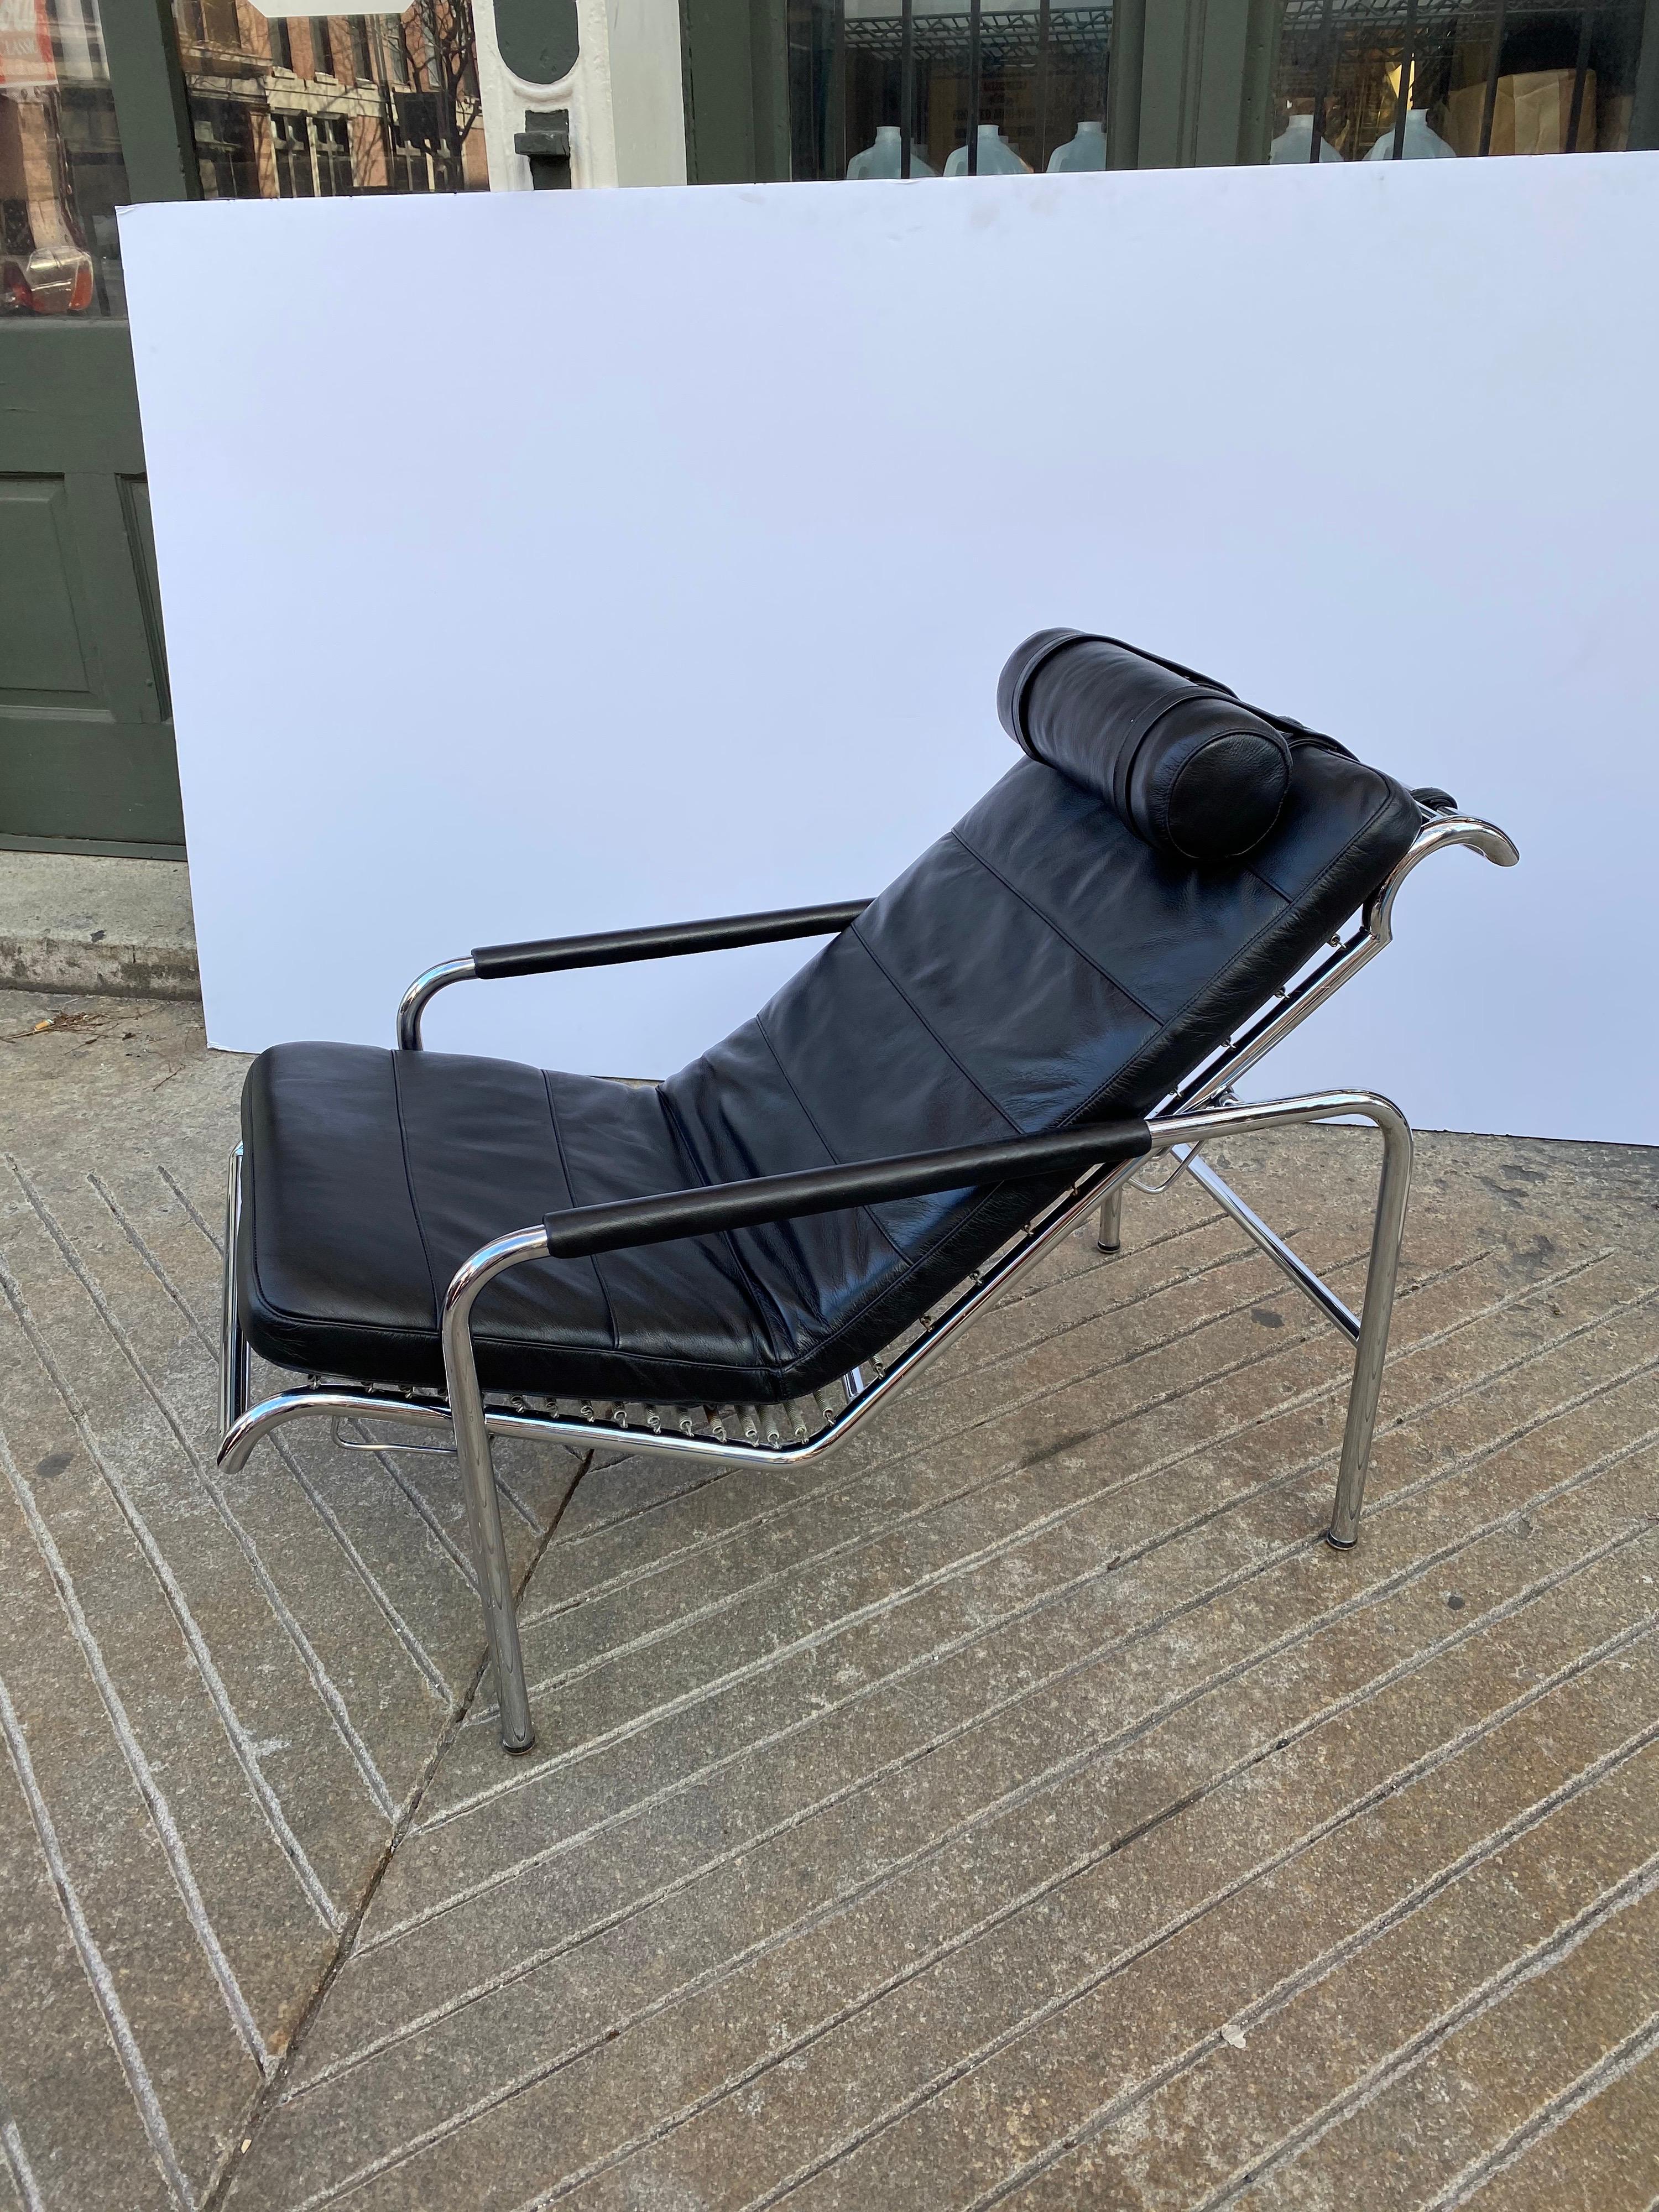 Late 20th Century Gabriele Mucchi Genni Chrome and Leather Lounge Chair for Zanotta